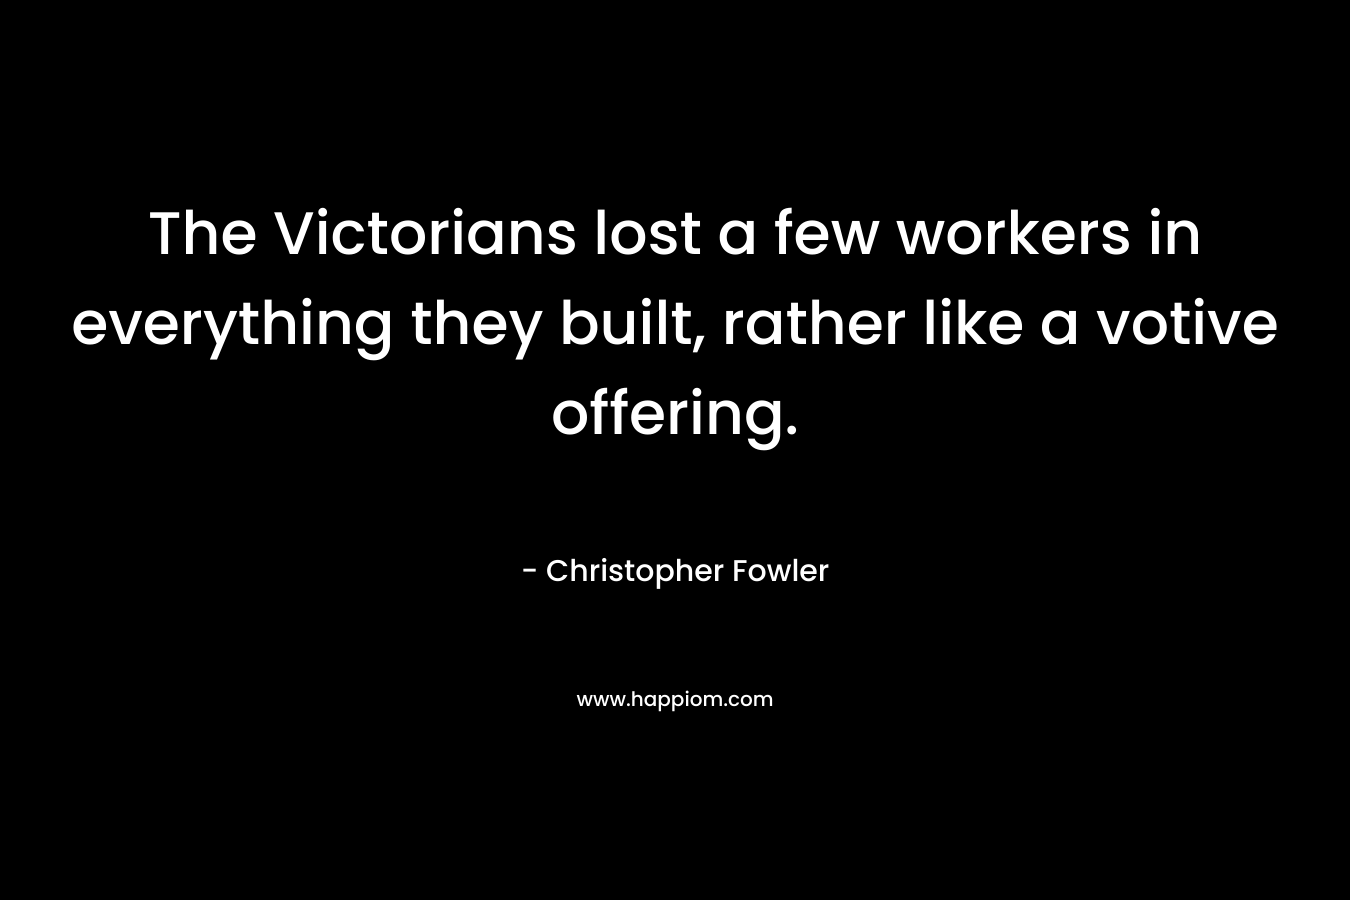 The Victorians lost a few workers in everything they built, rather like a votive offering. – Christopher Fowler